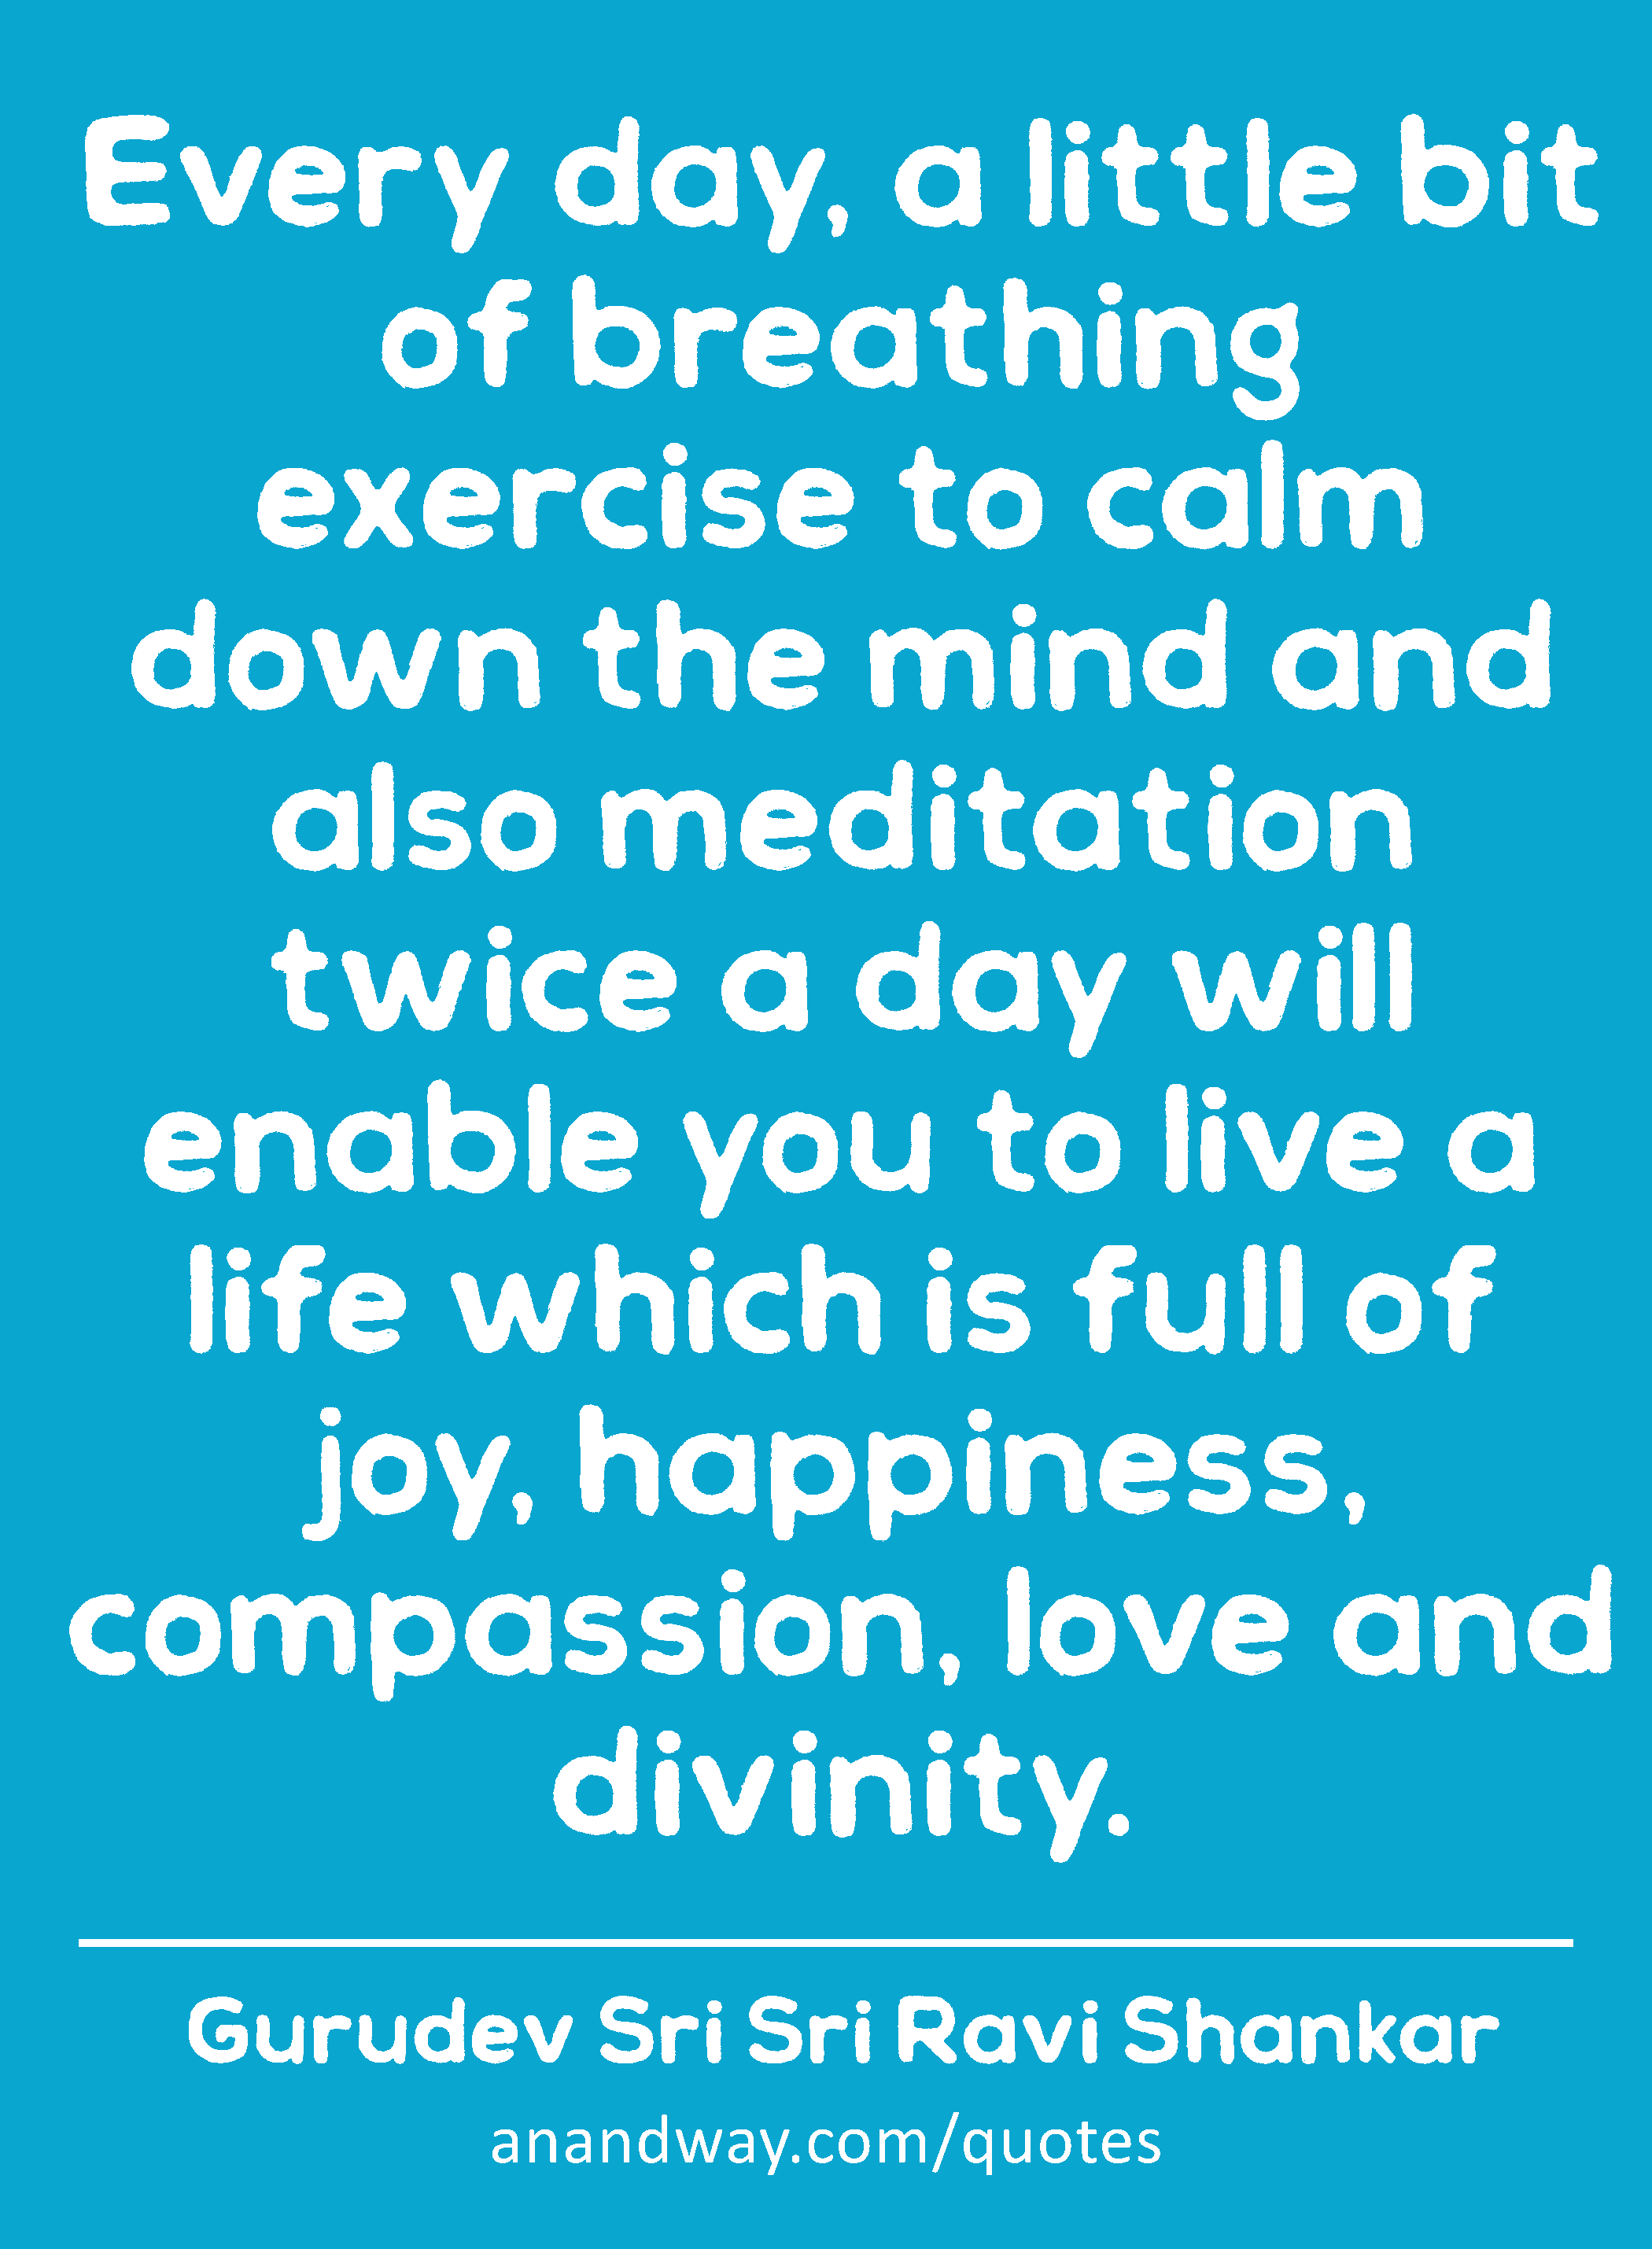 Every day, a little bit of breathing exercise to calm down the mind and also meditation twice a day
 -Gurudev Sri Sri Ravi Shankar